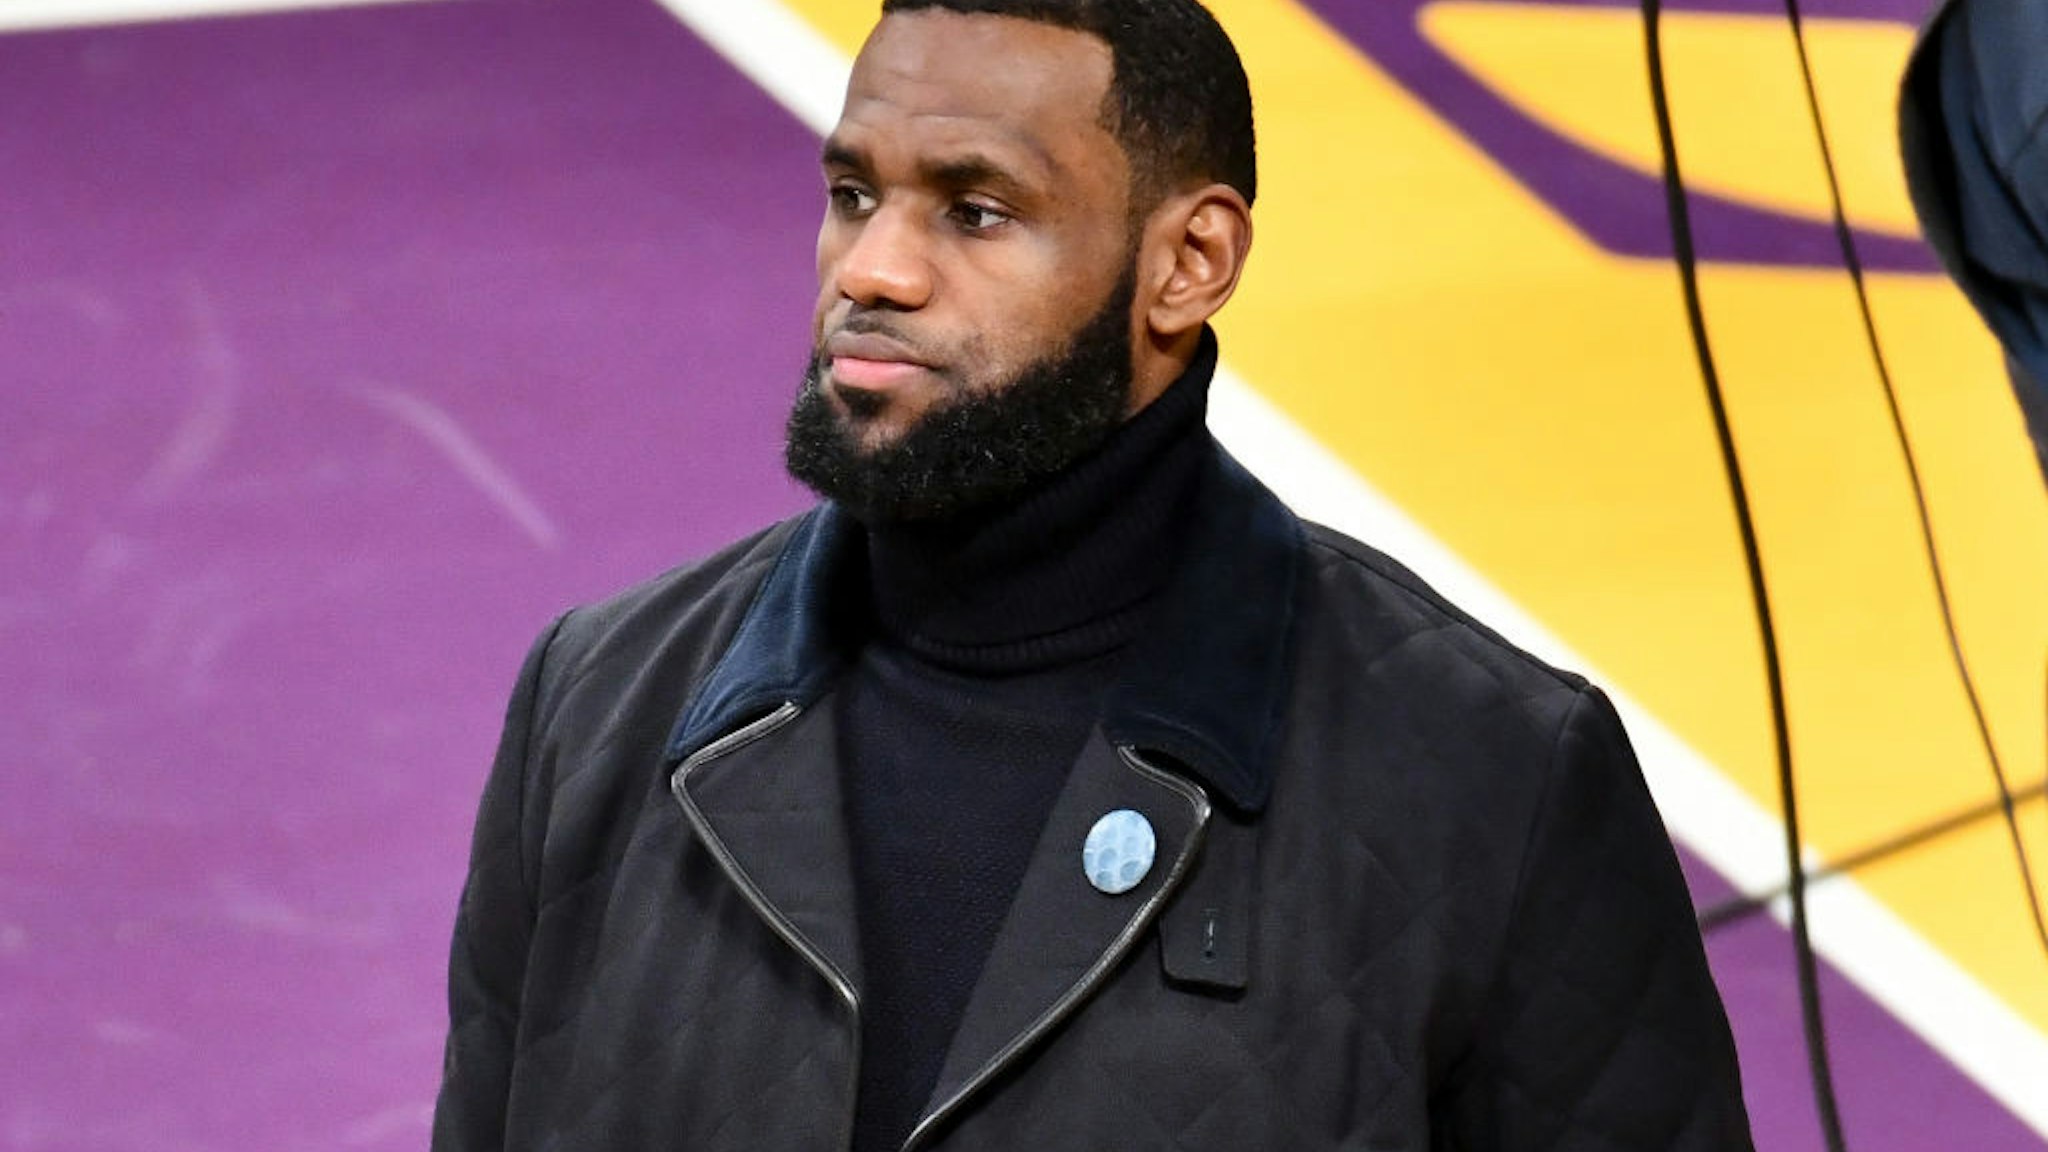 LOS ANGELES, CALIFORNIA - JANUARY 24: LeBron James attends a basketball game between the Los Angeles Lakers and the Minnesota Timberwolves at Staples Center on January 24, 2019 in Los Angeles, California. (Photo by Allen Berezovsky/Getty Images)